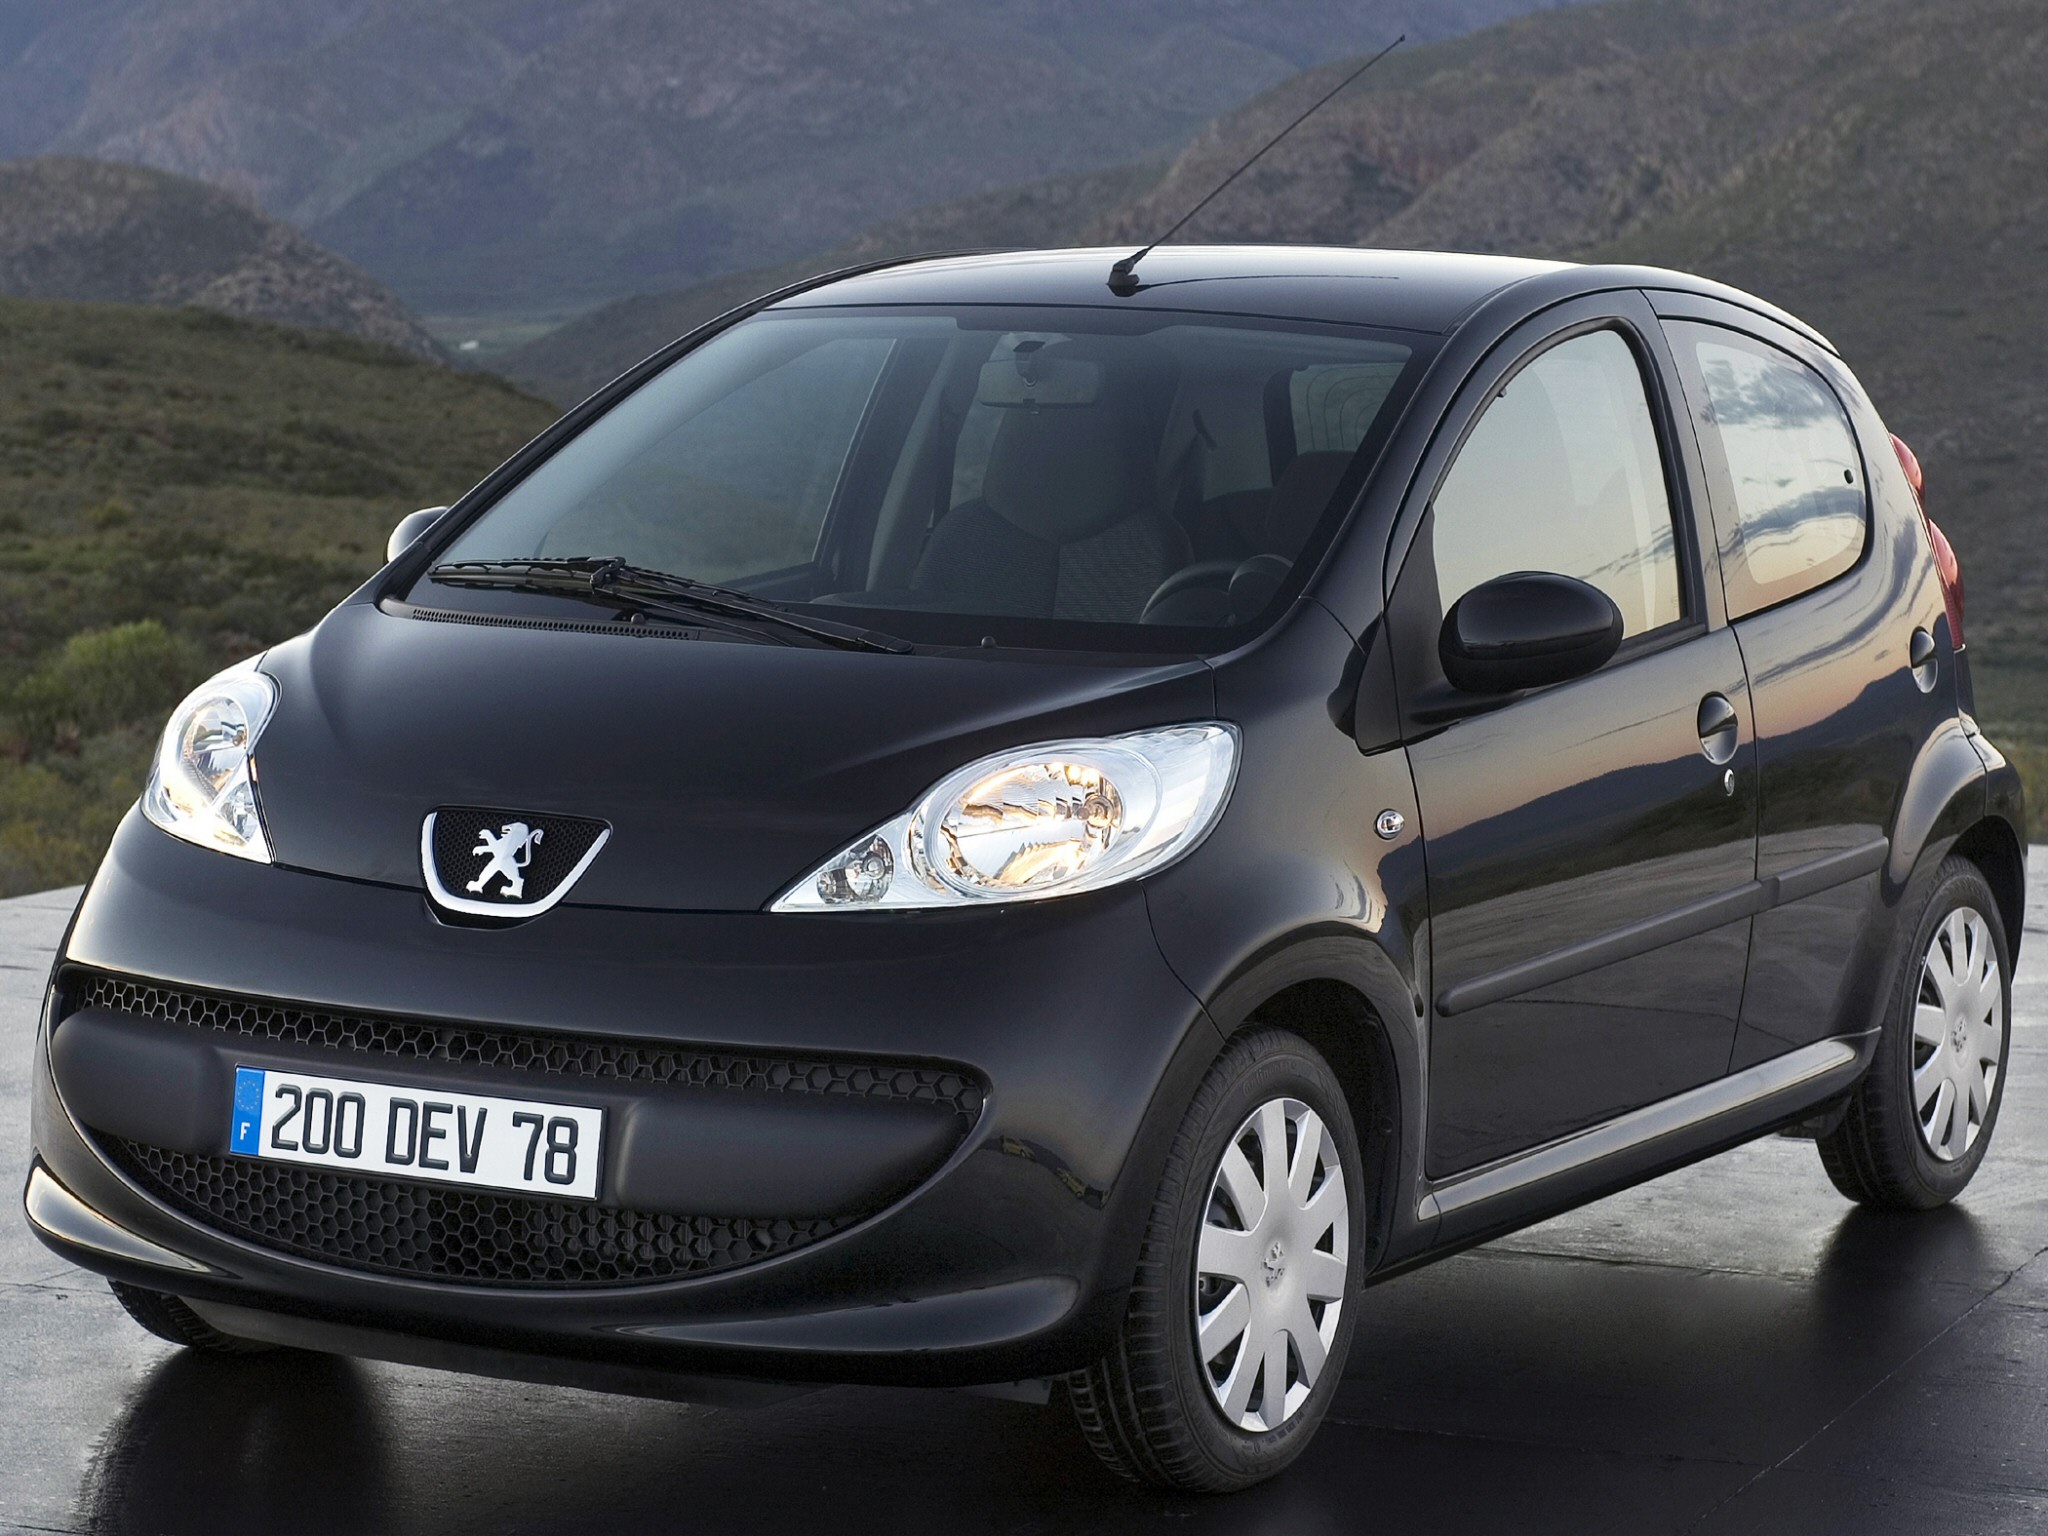 Car in pictures car photo gallery » Peugeot 107 2005